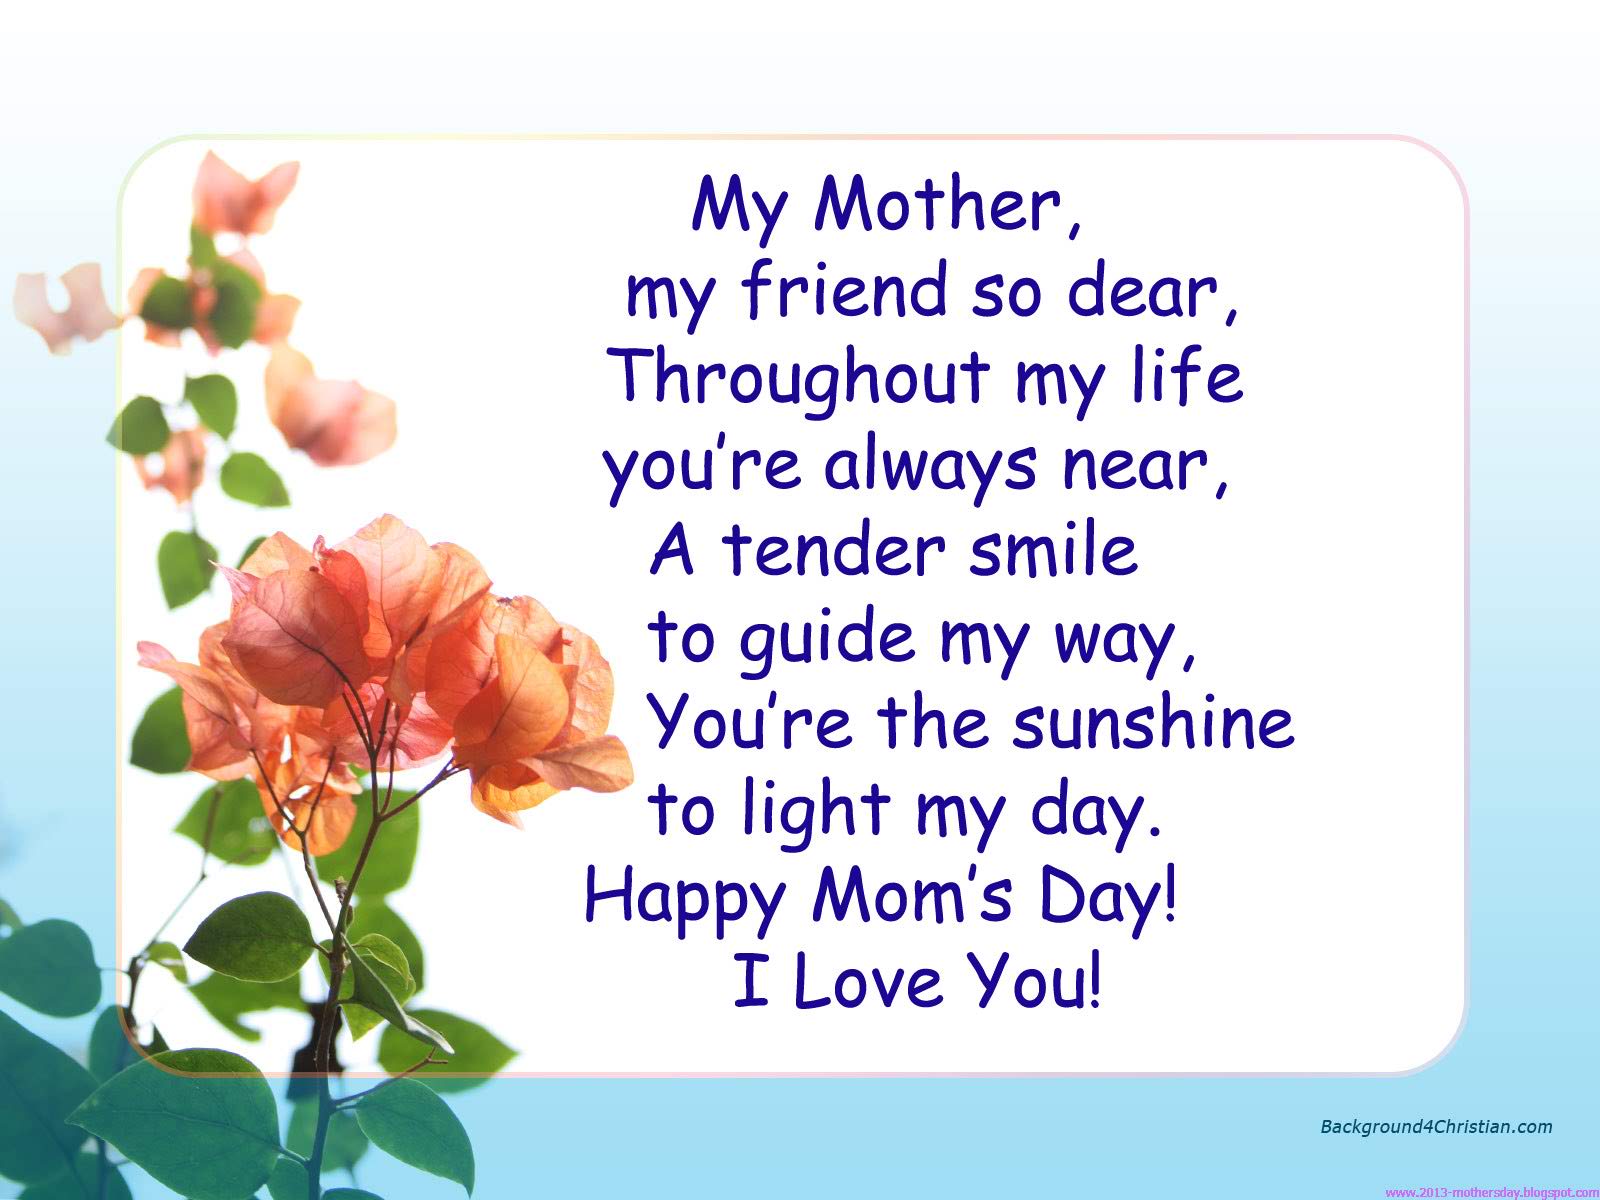 Mothers Day Quotes Wallpaper, Happy Mothers Day Quotes